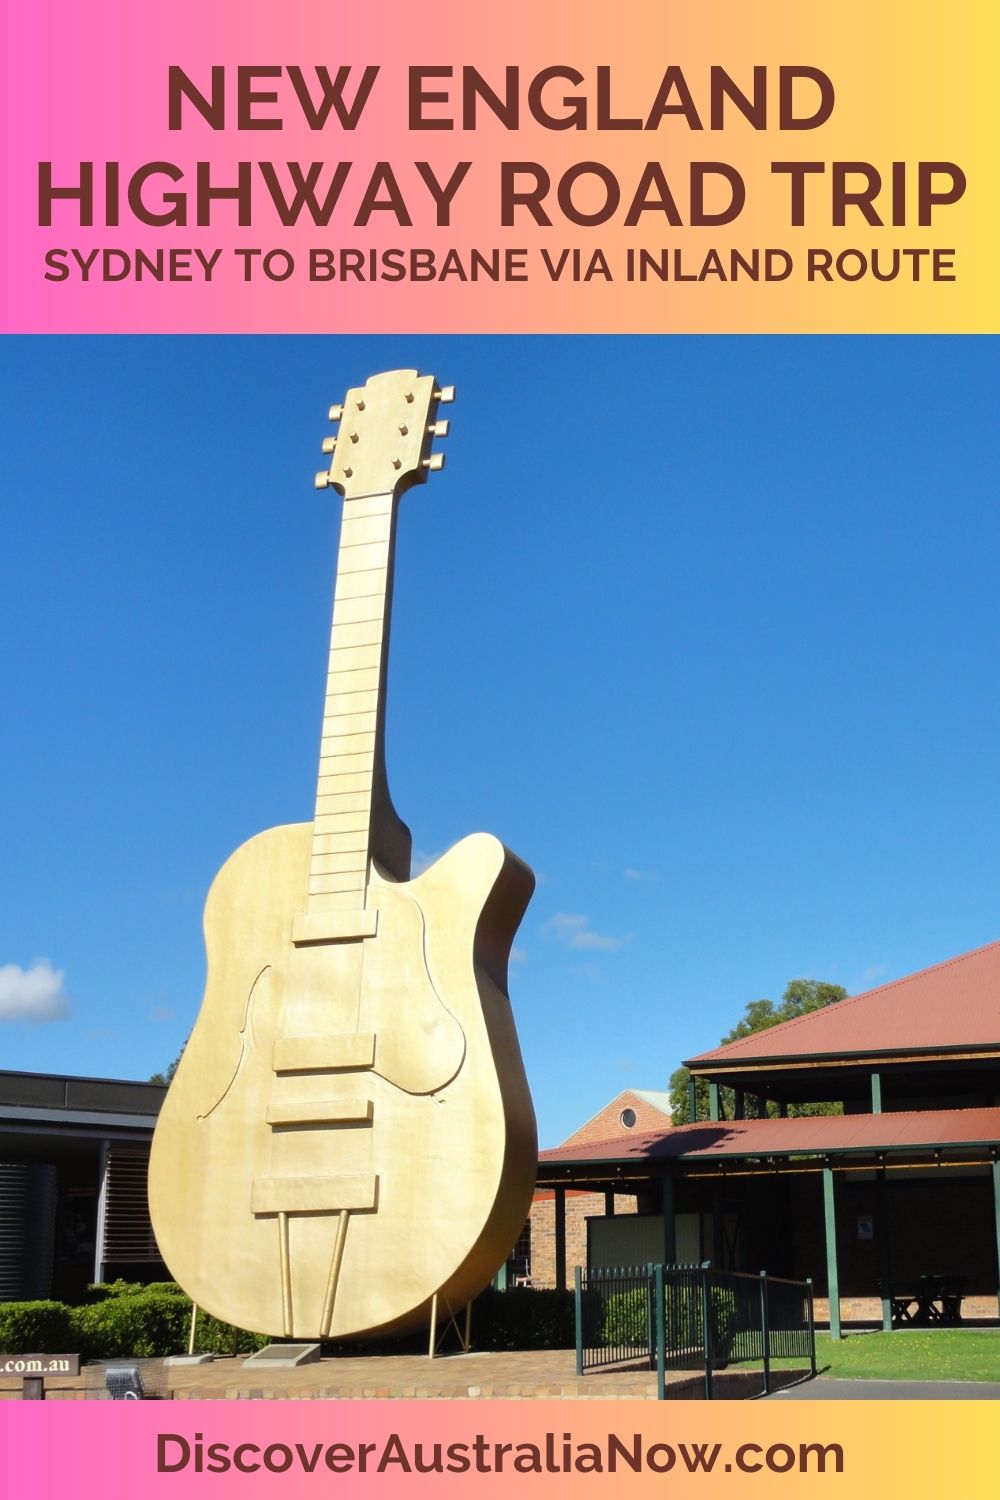 See the Golden Guitar in Tamworth when driving the New England Highway road trip.